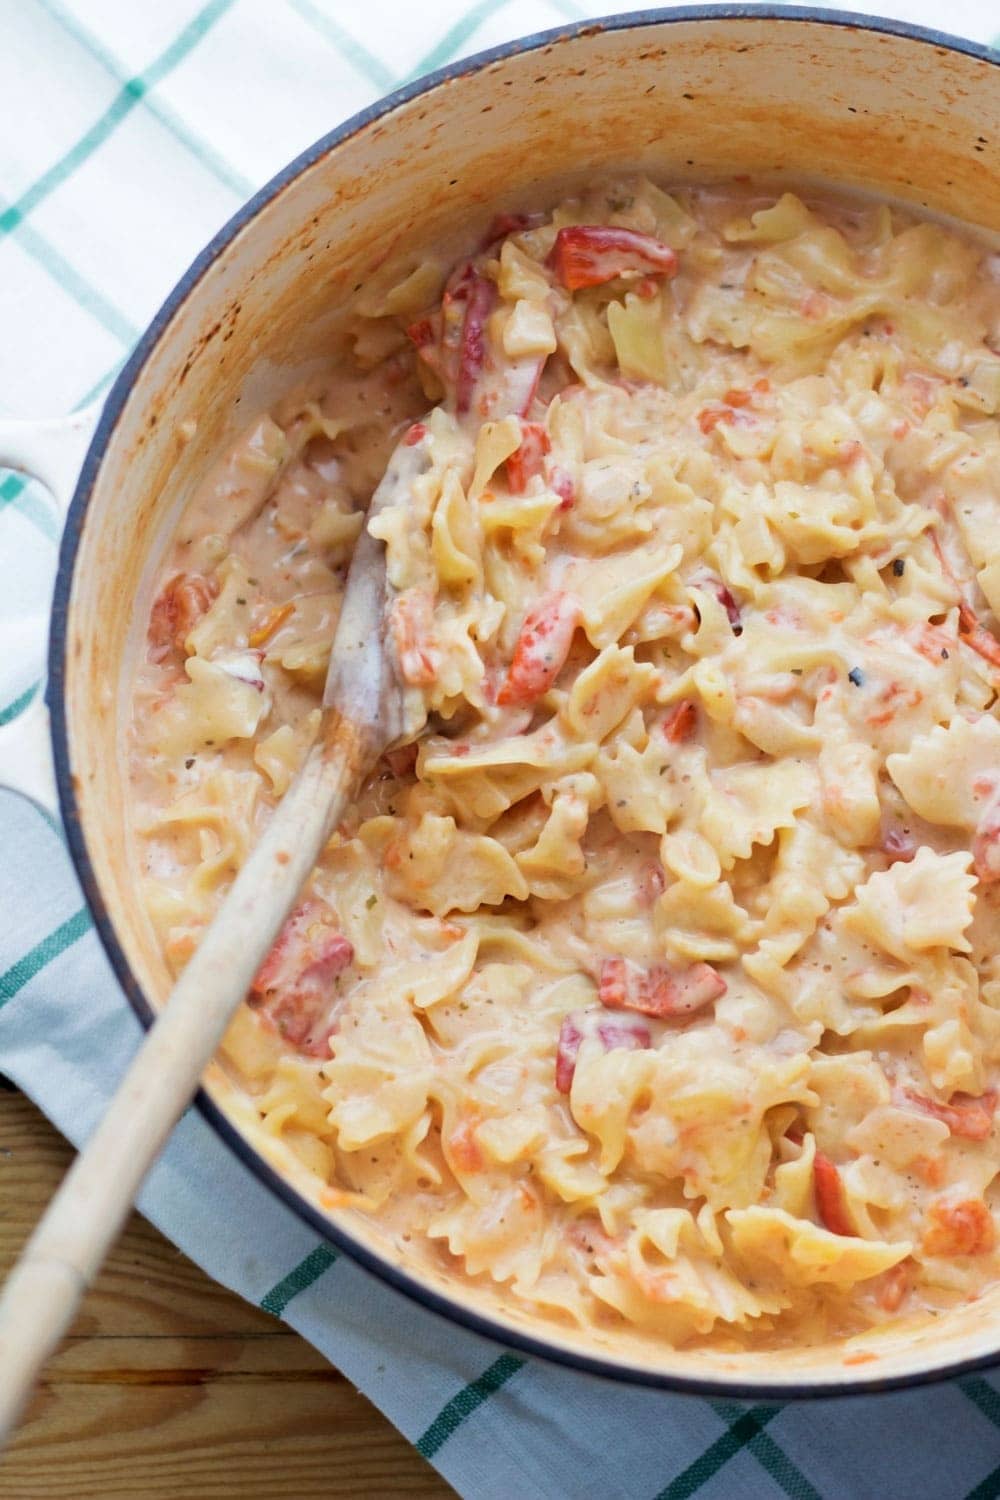 This Cheesy Roasted Red Pepper One Pot Pasta comes together in 20 minutes and is full of comforting cream cheese and the smoky flavour of roasted red peppers.